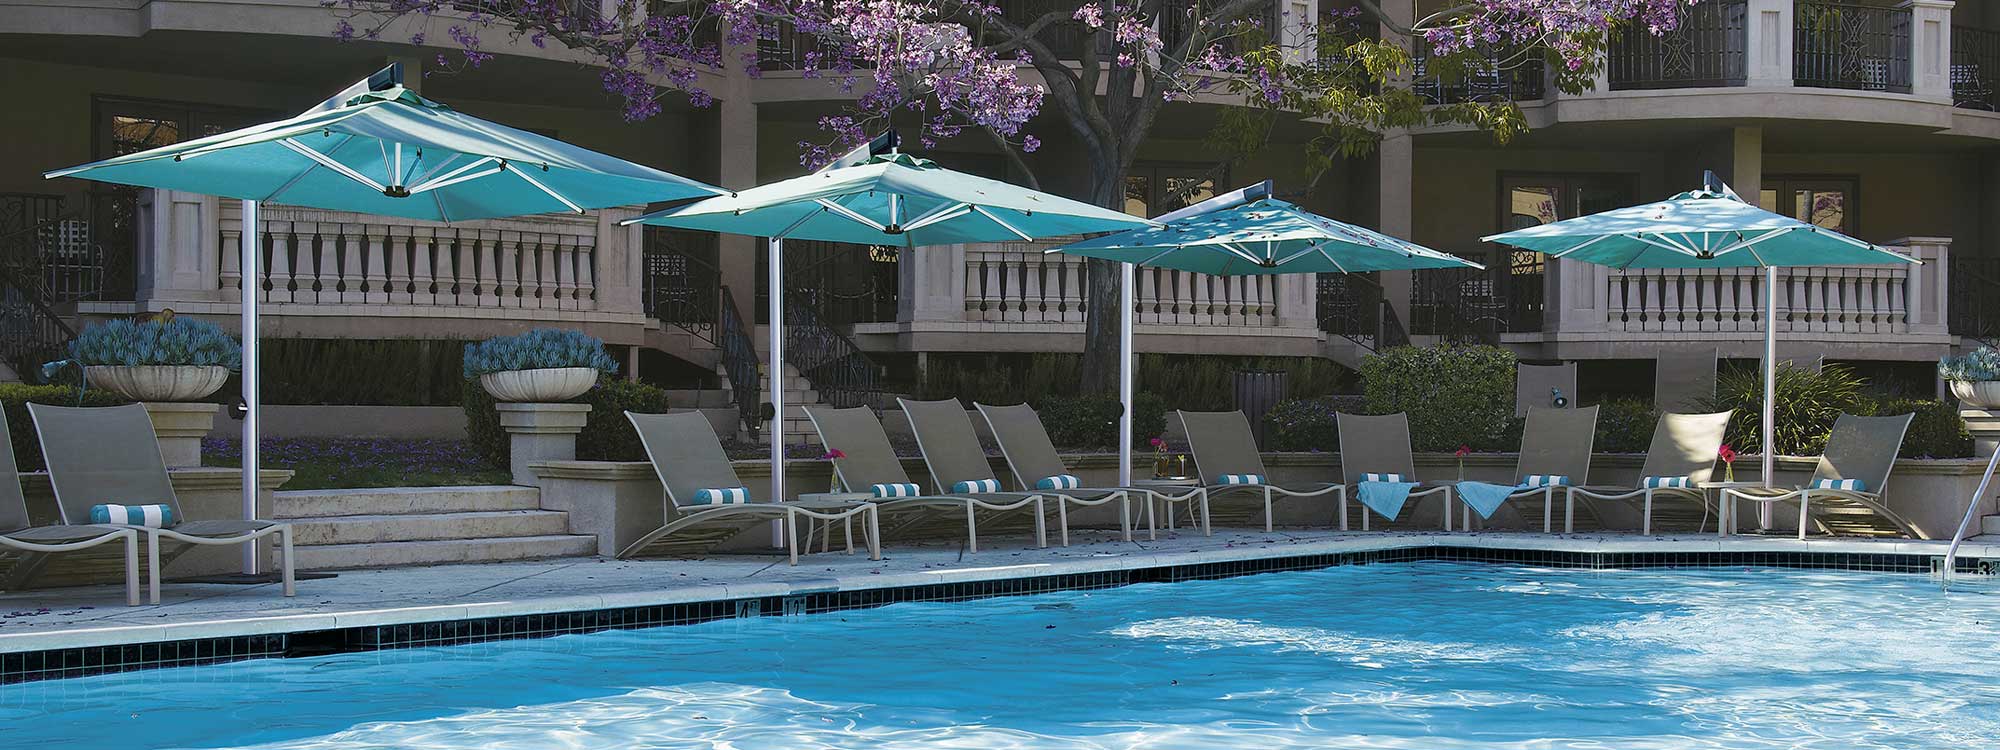 Image of Shademaker Orion side post parasols with turquoise canopies, shown around hotel poolside with sun loungers beneath the parasol canopies